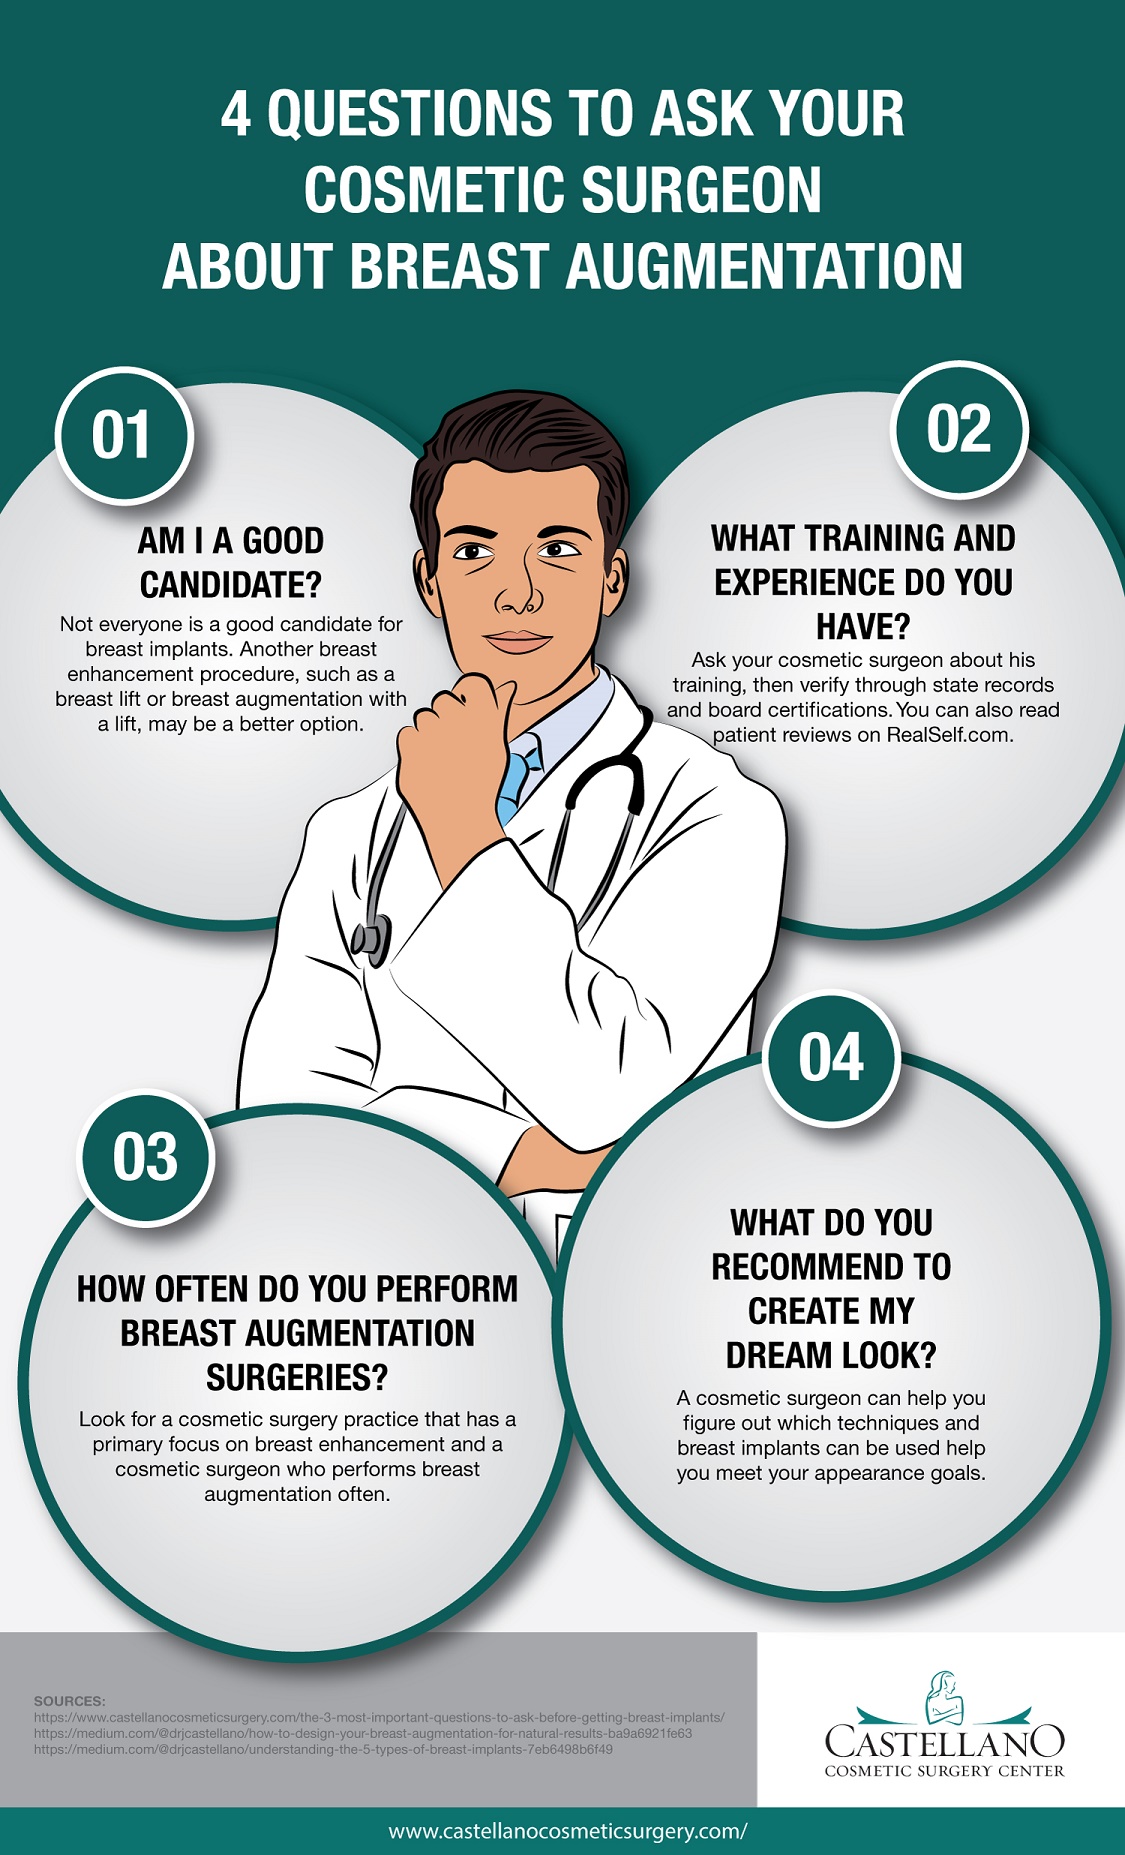 4 Questions to Ask about Breast Augmentation [Infographic]